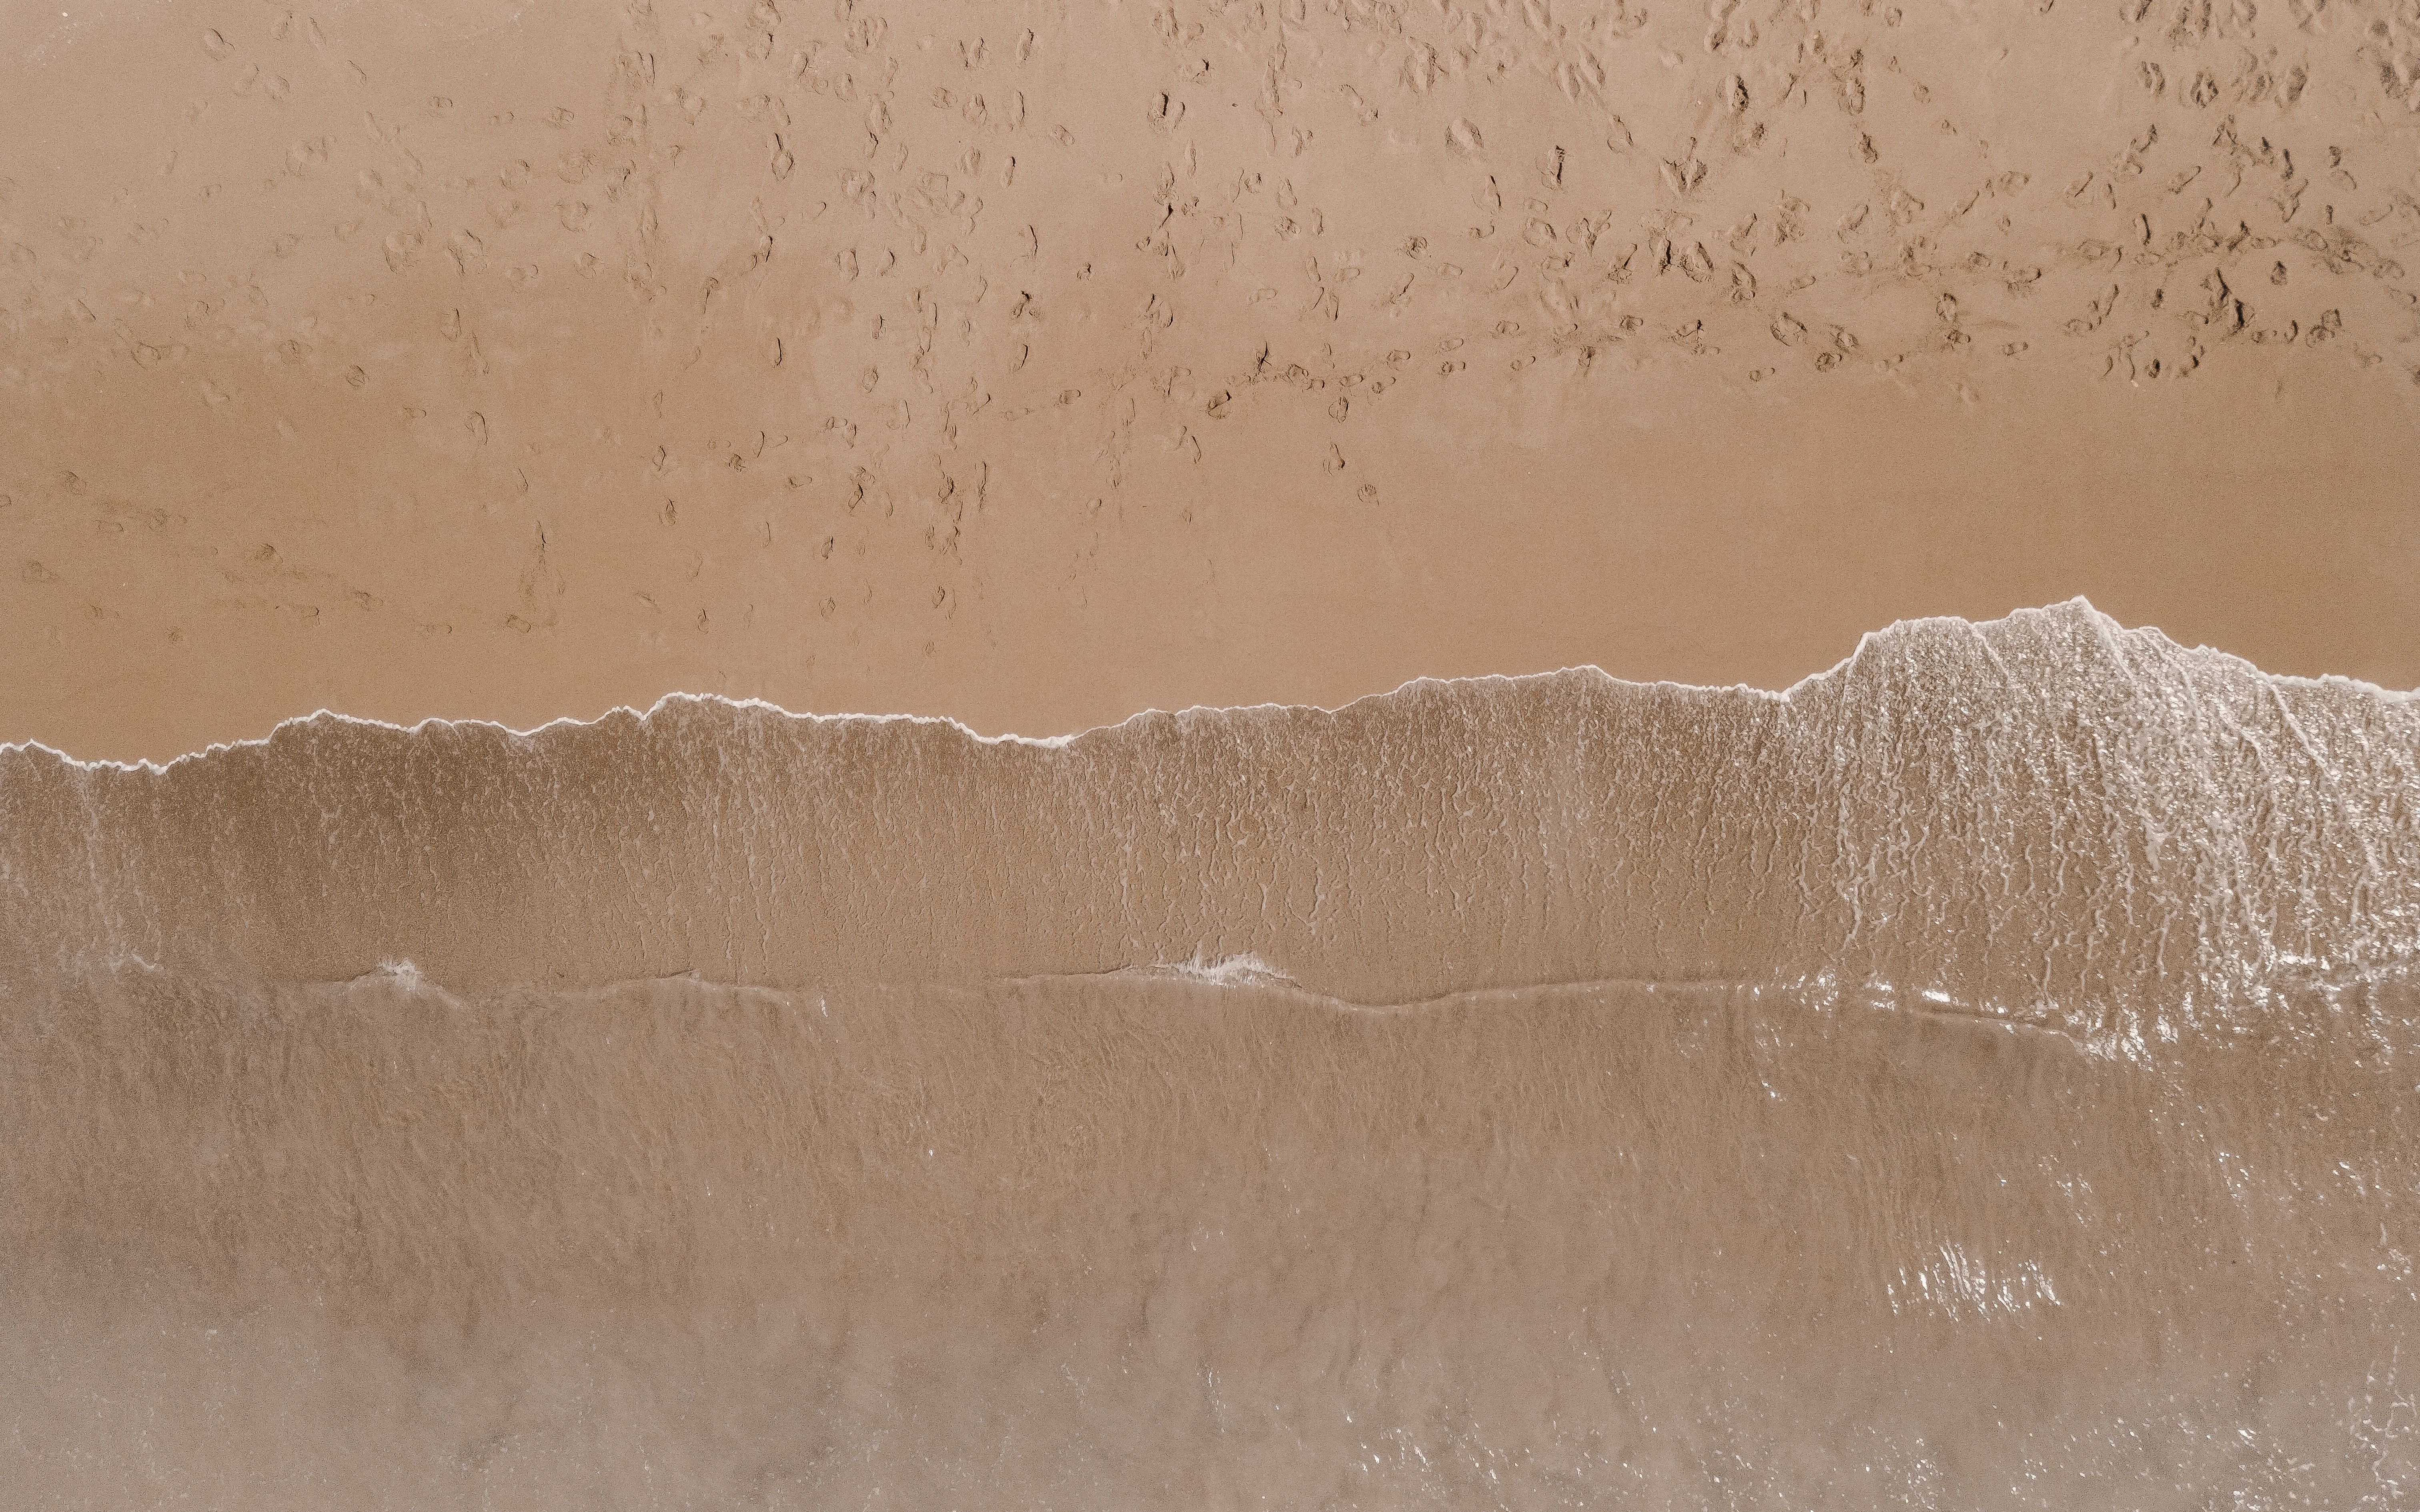 Aerial view of a sandy beach with a wave